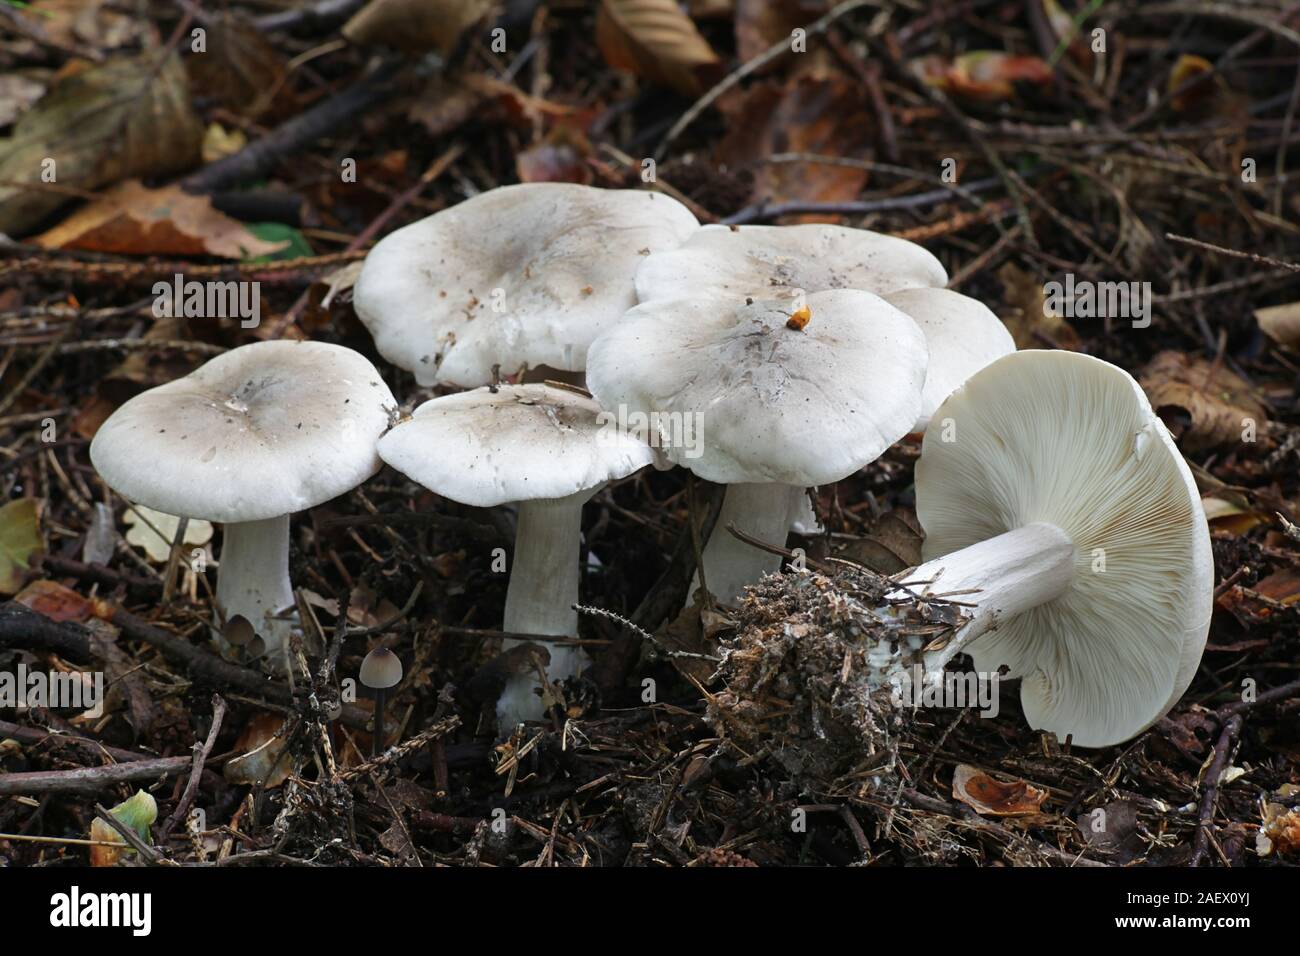 Clitocybe nebularis, known as the clouded agaric or cloud funnel, mushrooms from Finland Stock Photo